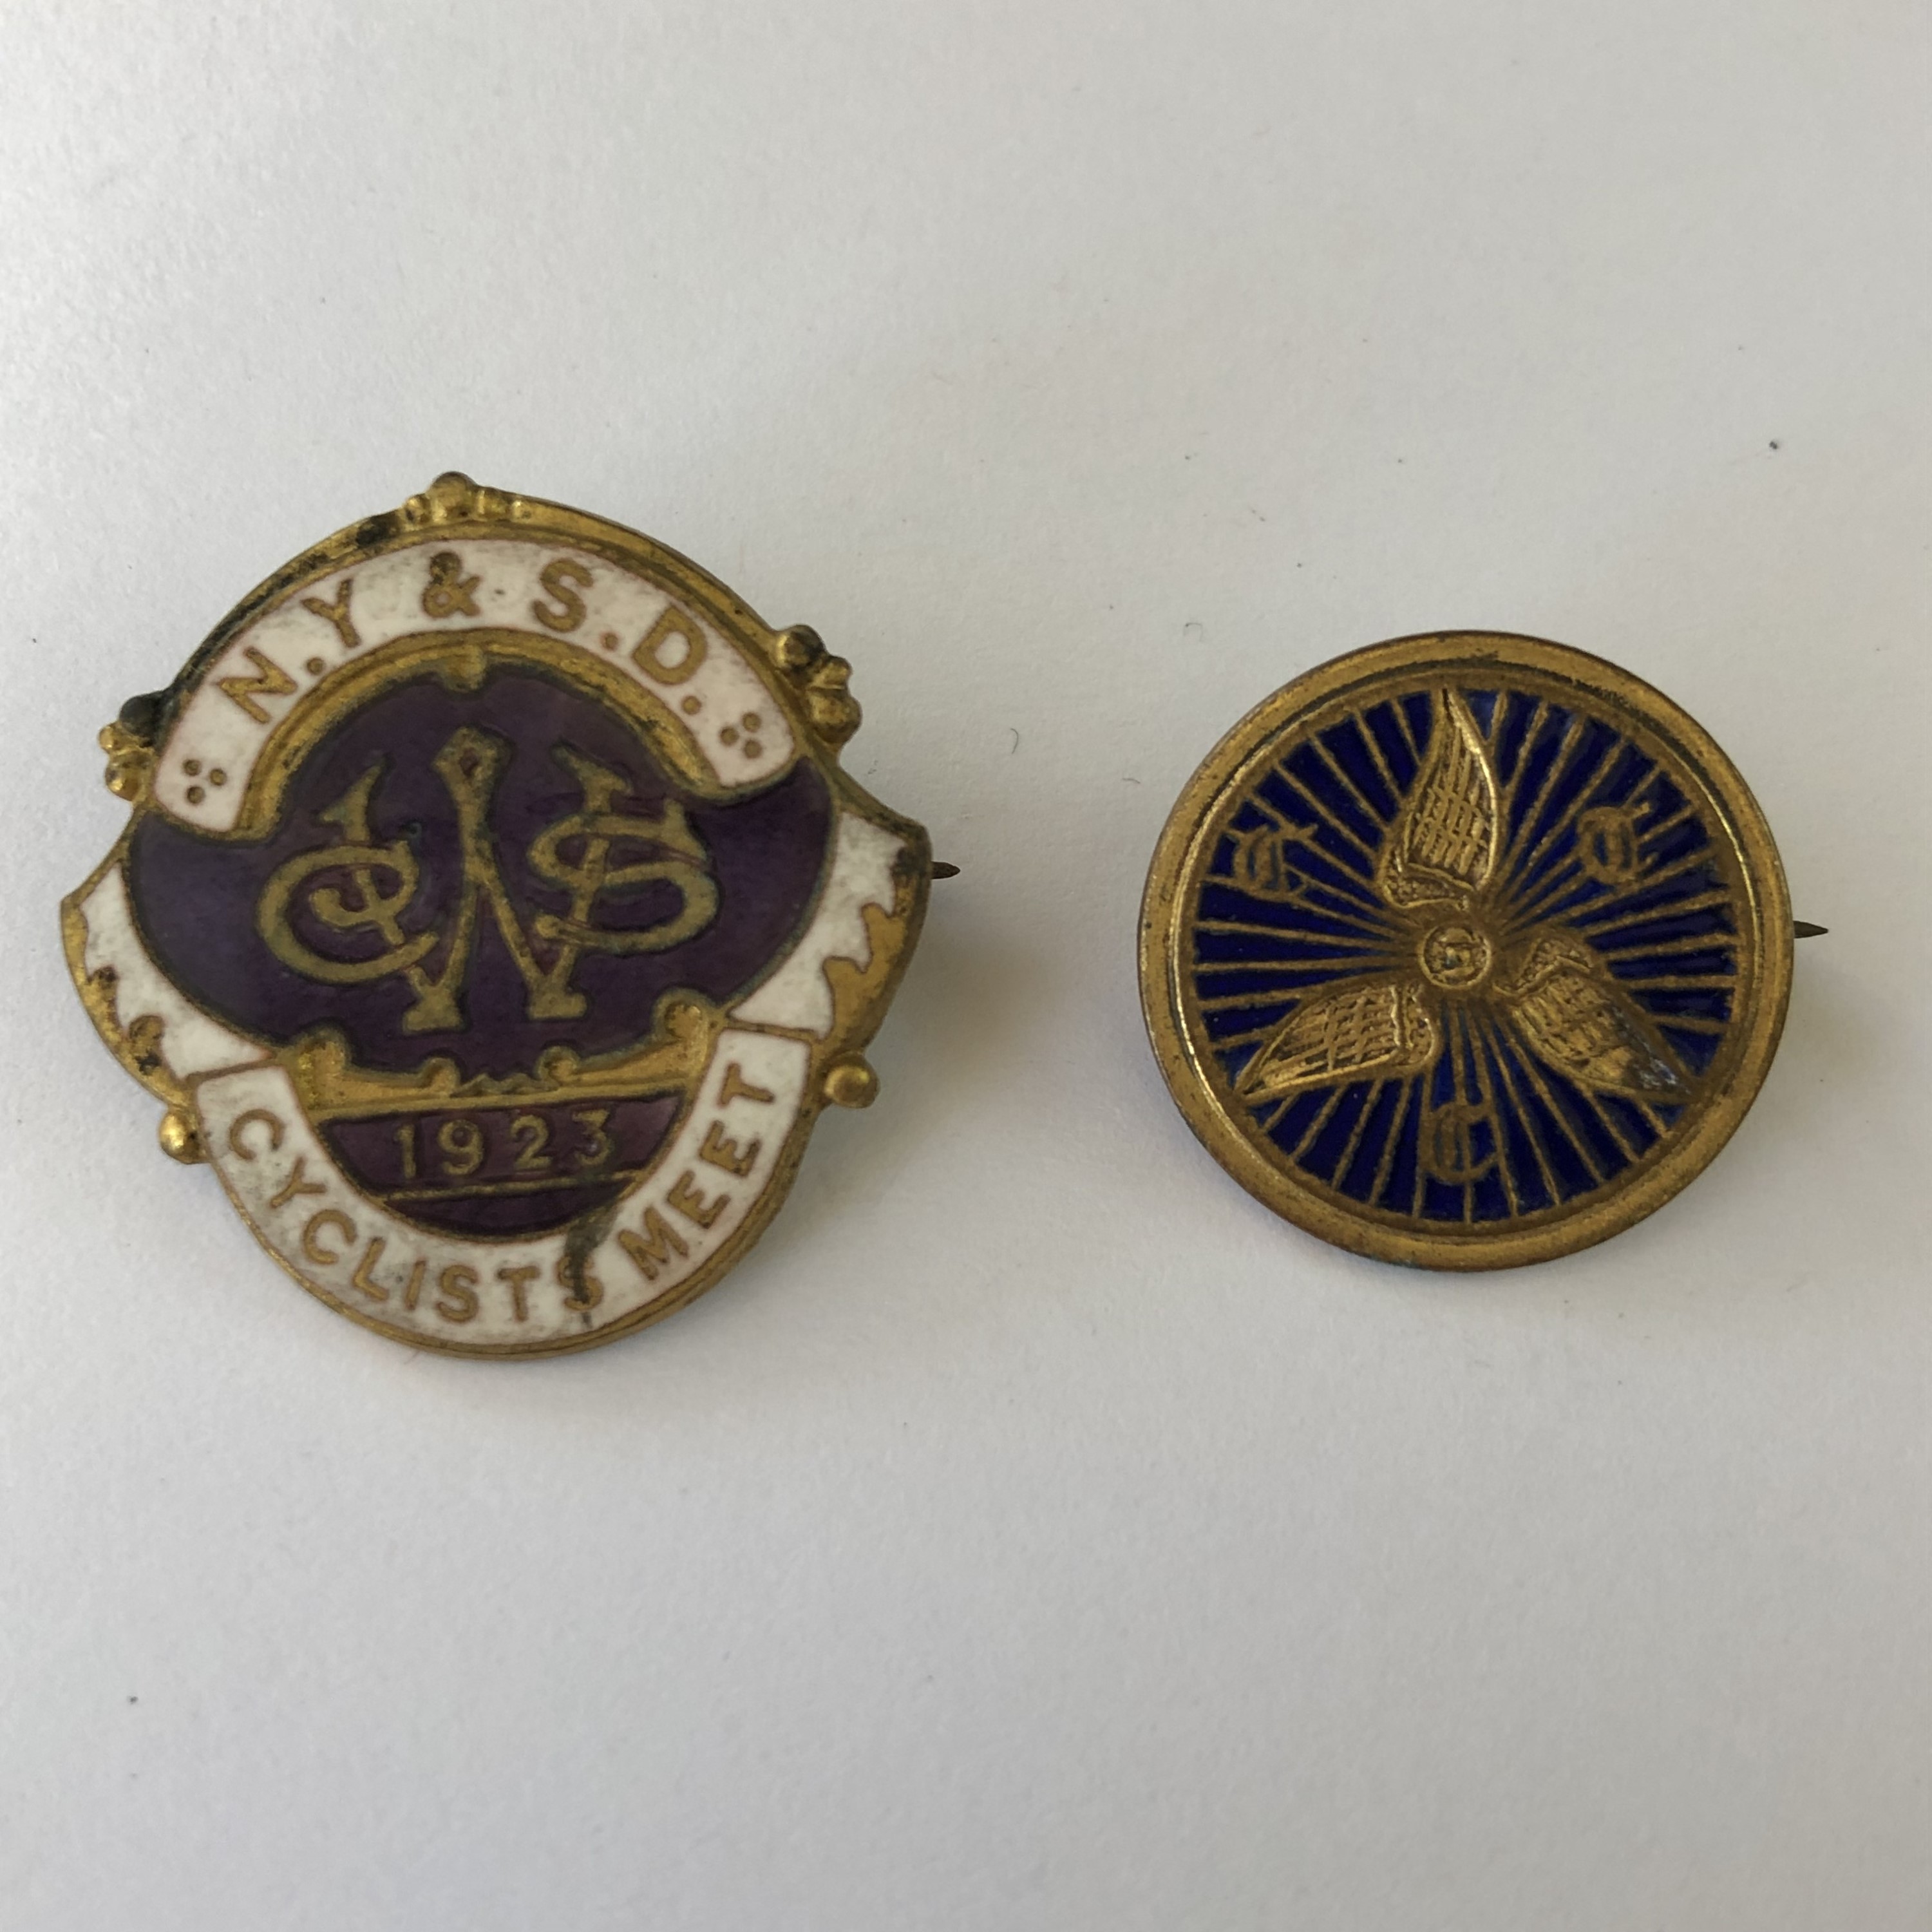 A 1923 "Cyclist Meet" enamelled lapel badge and one other early 20th Century bicycle association